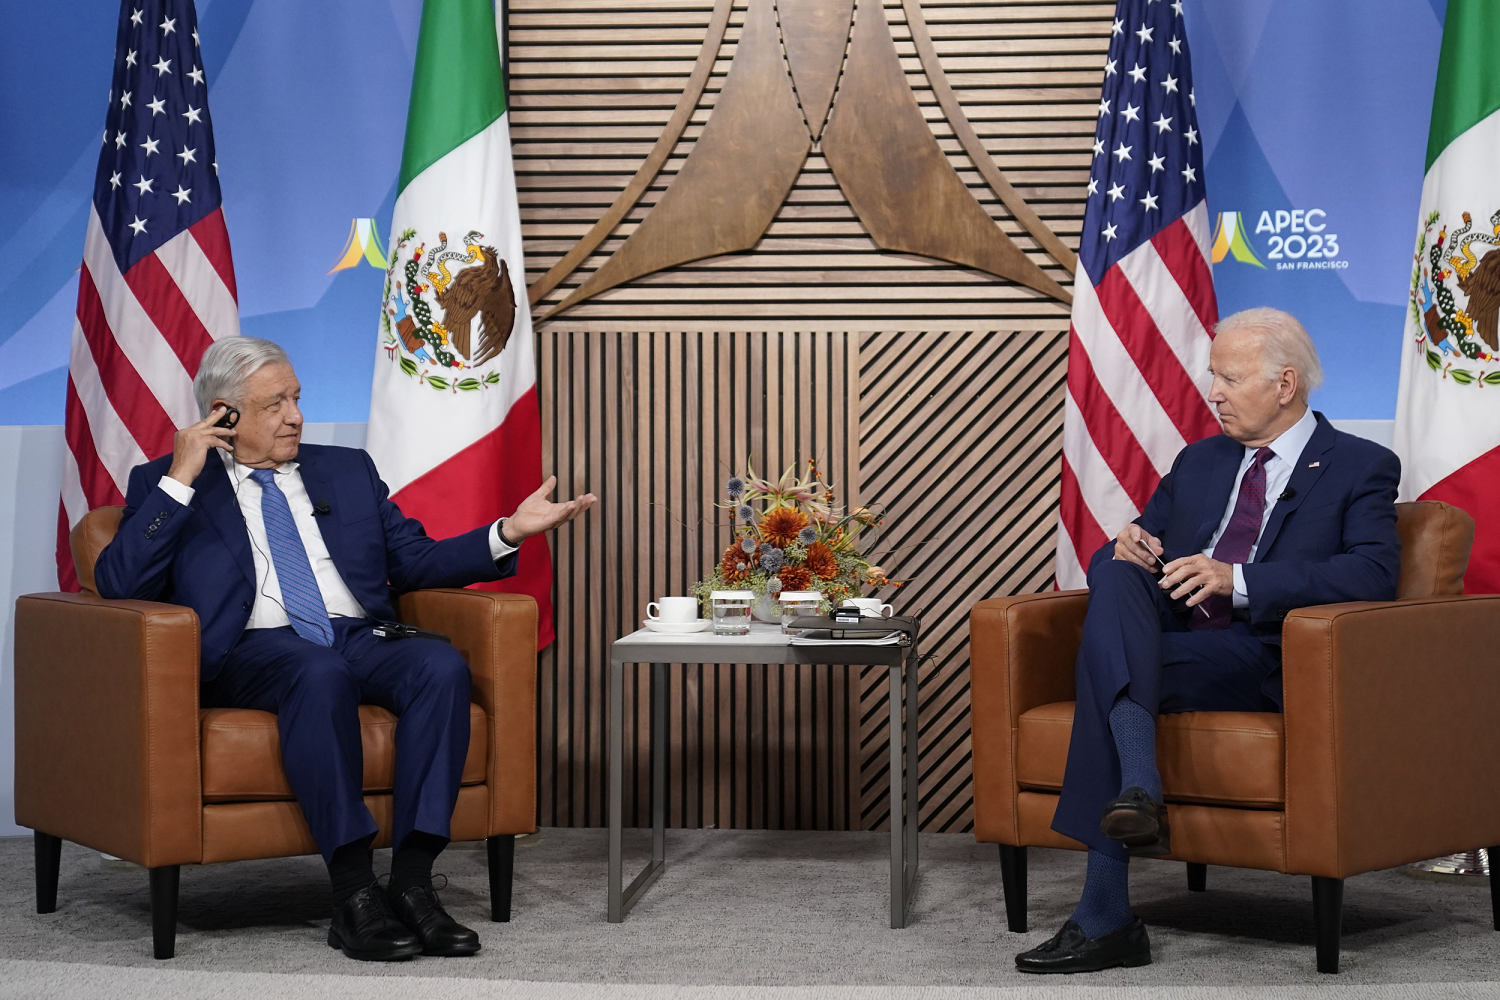 Biden to discuss migration with Mexico’s president during Friday meeting